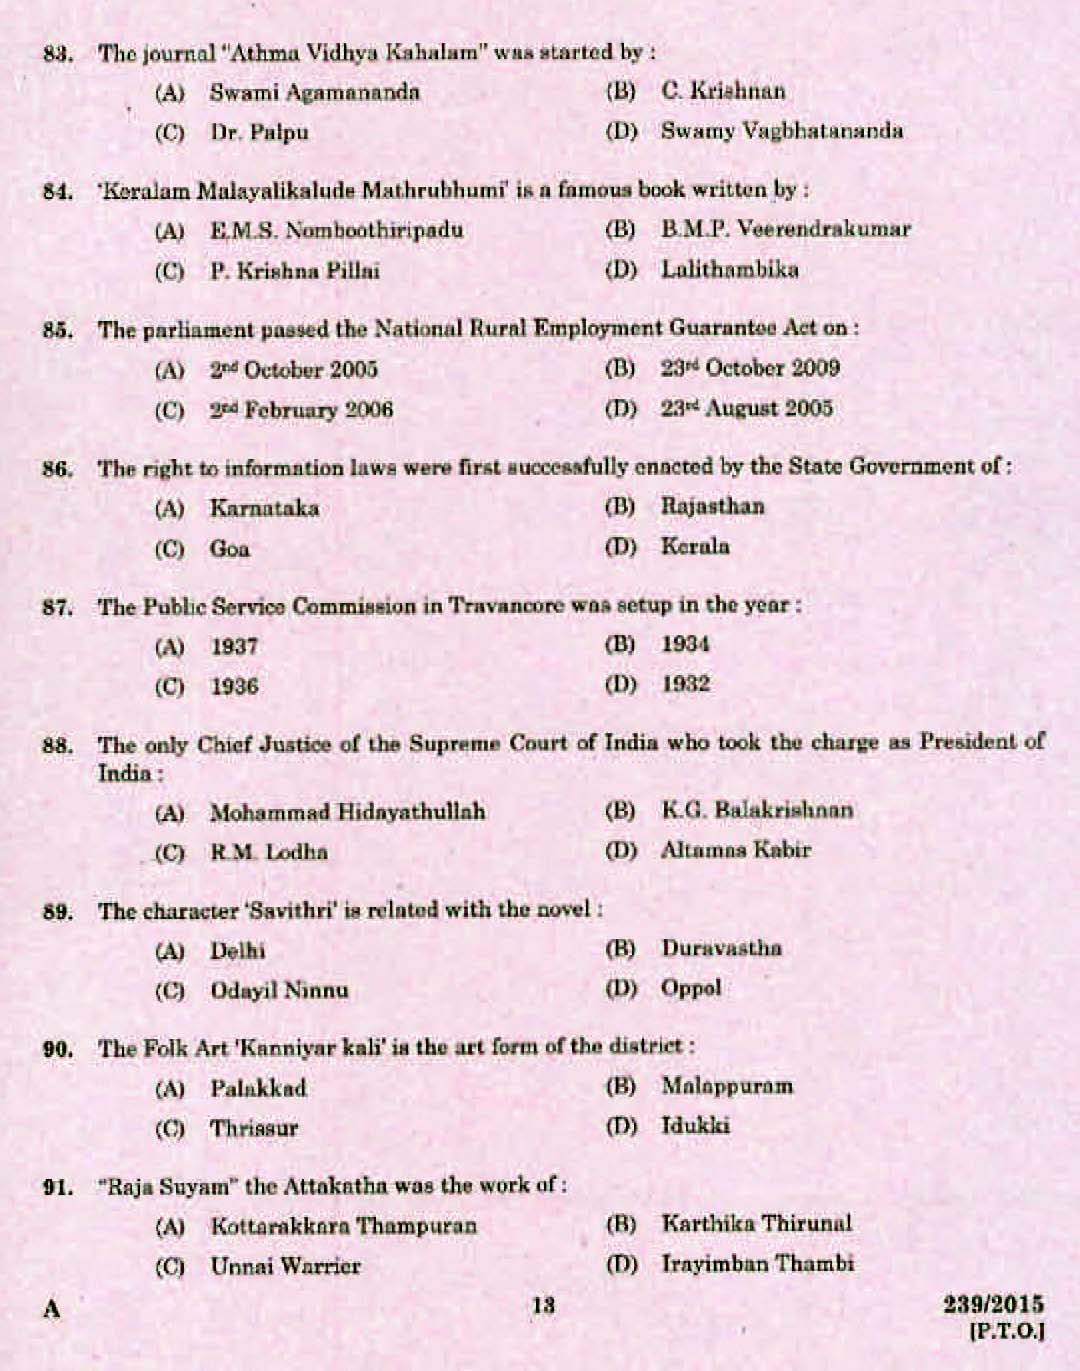 Kerala PSC Accounts Officer OMR Exam 2015 Question Paper Code 2392015 11